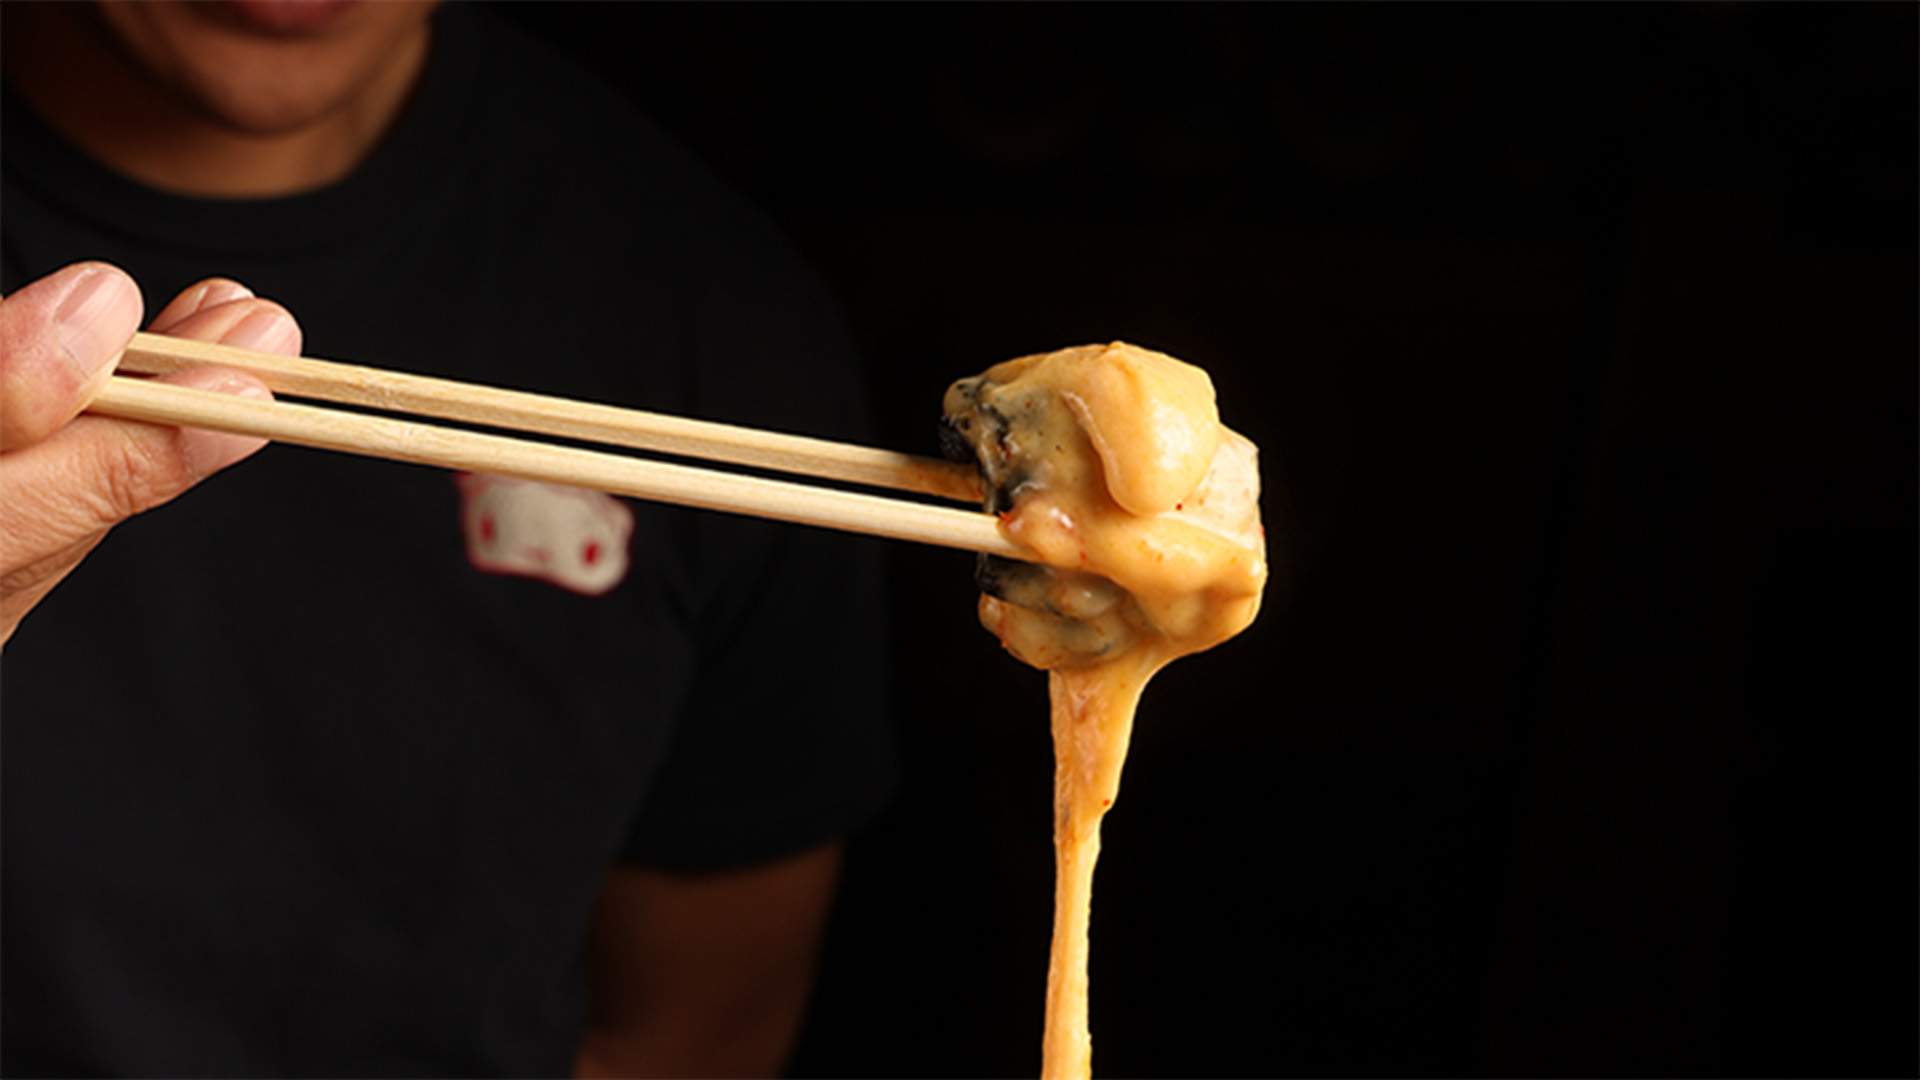 Harajuku Gyoza Is Now Serving Up Charcoal Karaage Chicken Fondue to Warm Up Your Winter